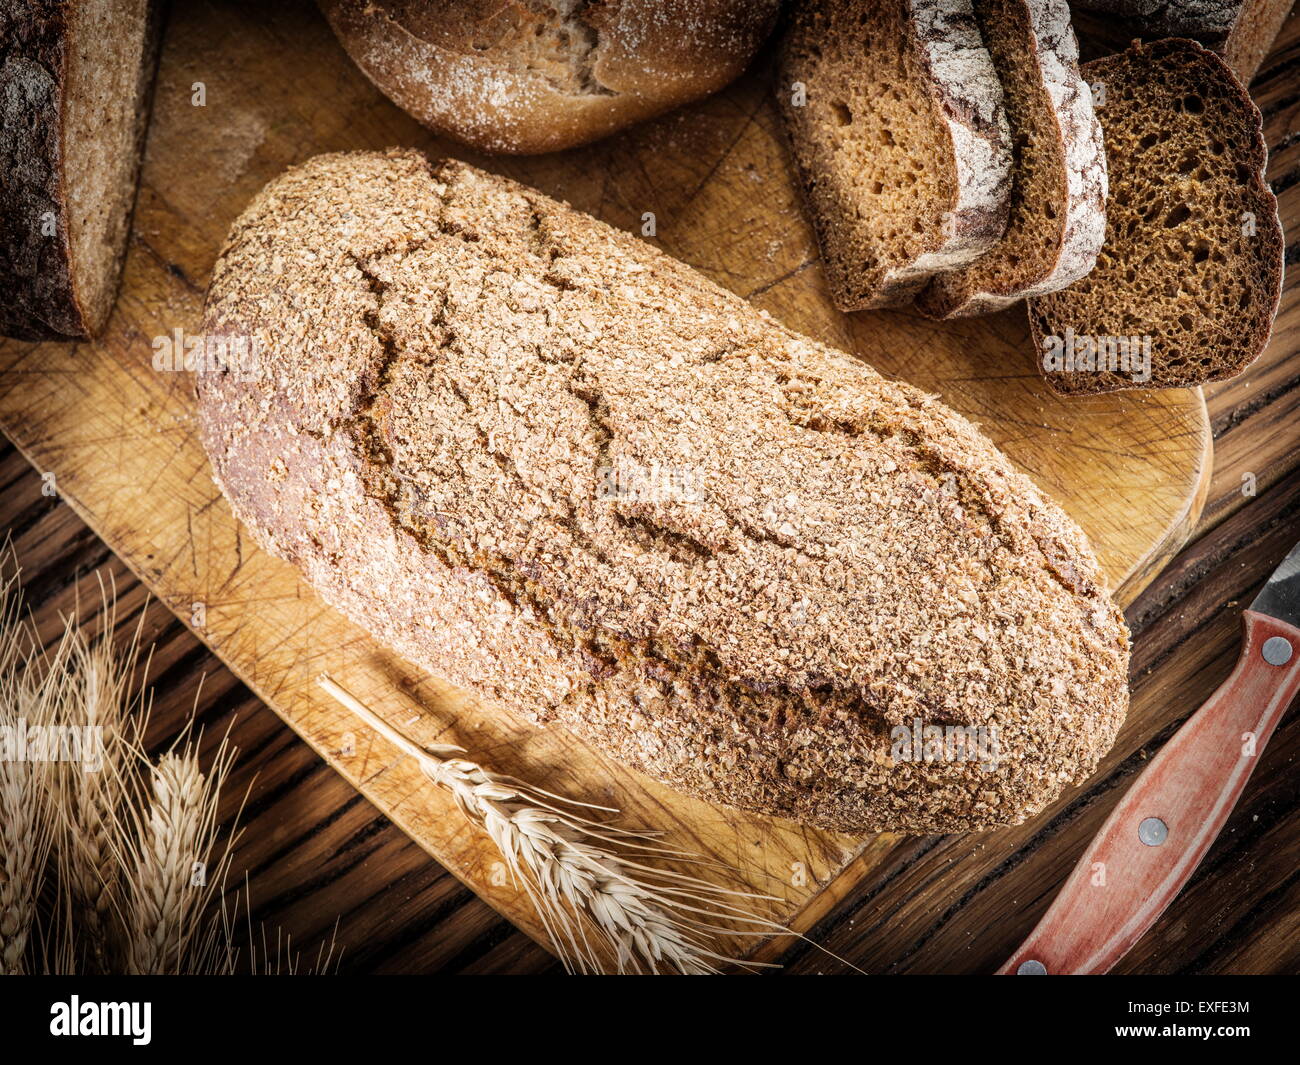 Rye-bread loaf on the wooden plank. Stock Photo